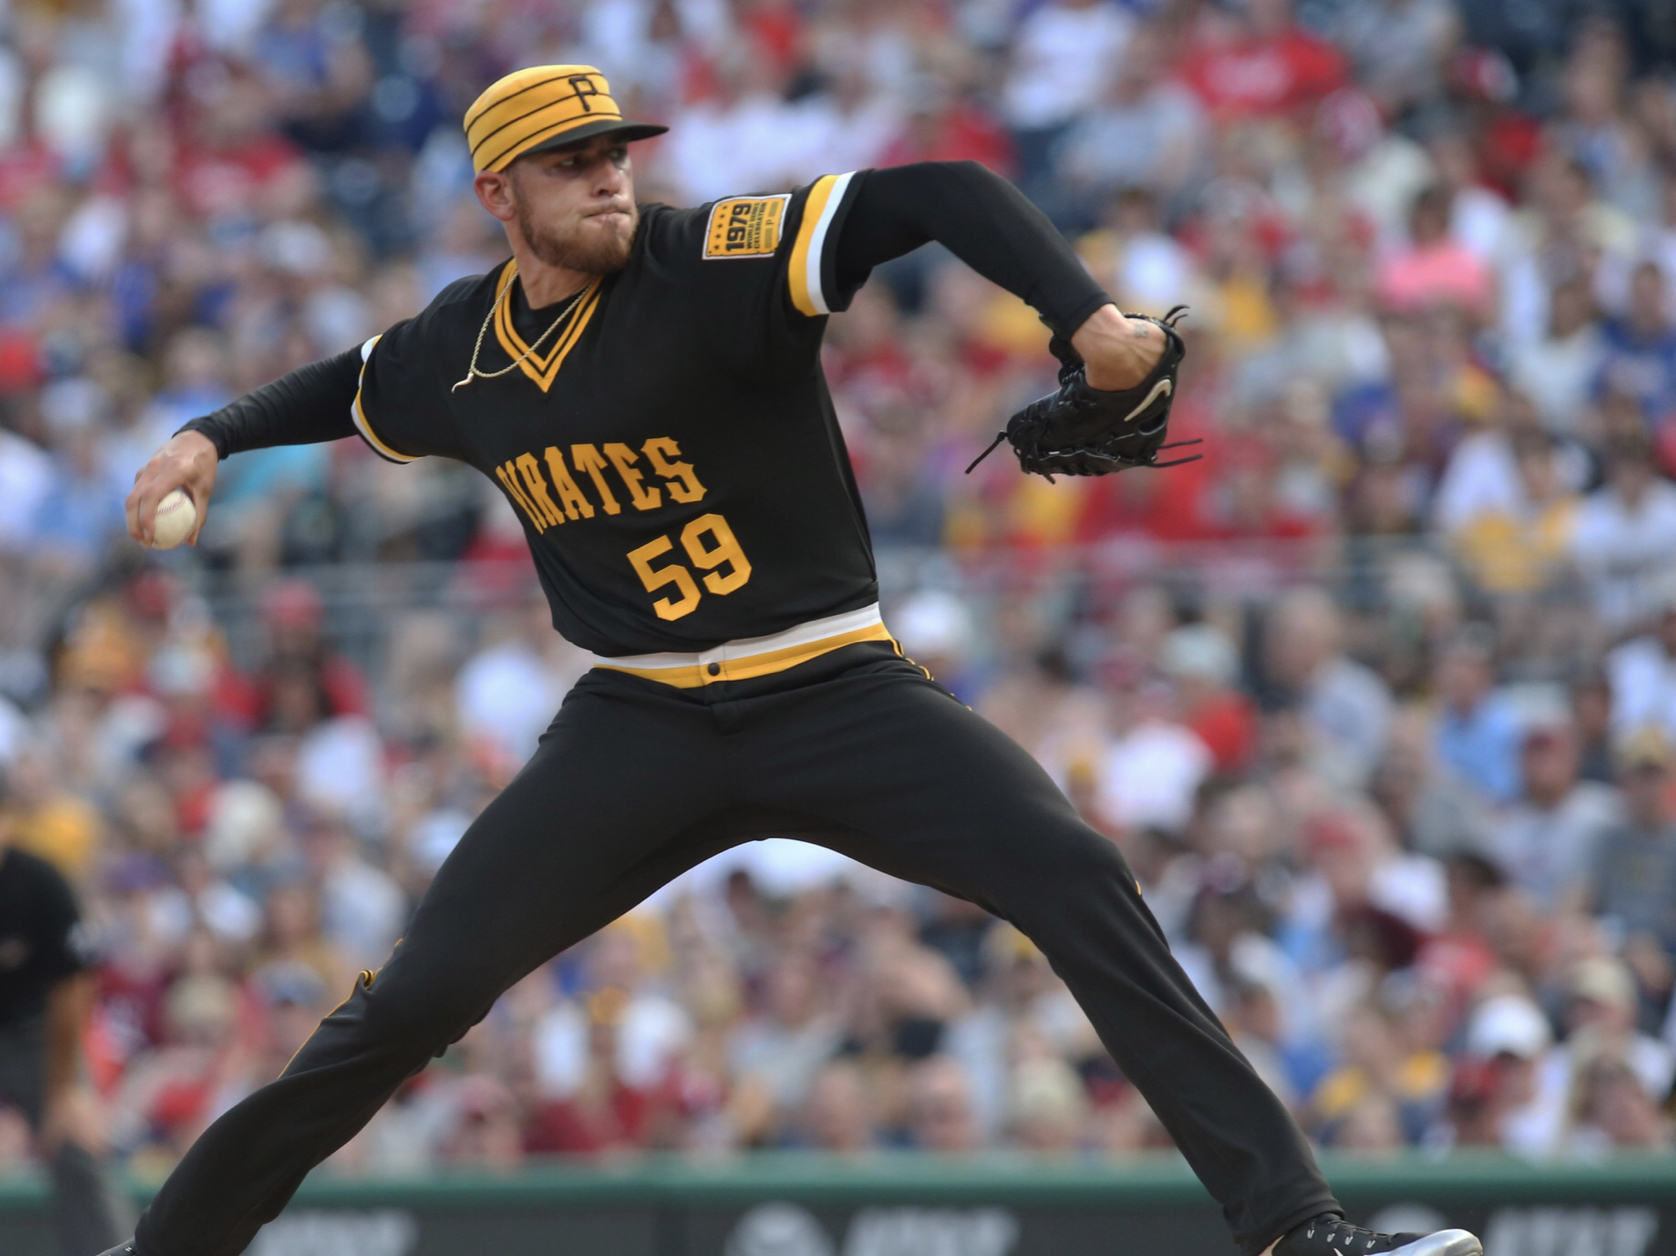 Pirates unveil baseball's freshest look with 1979 throwback